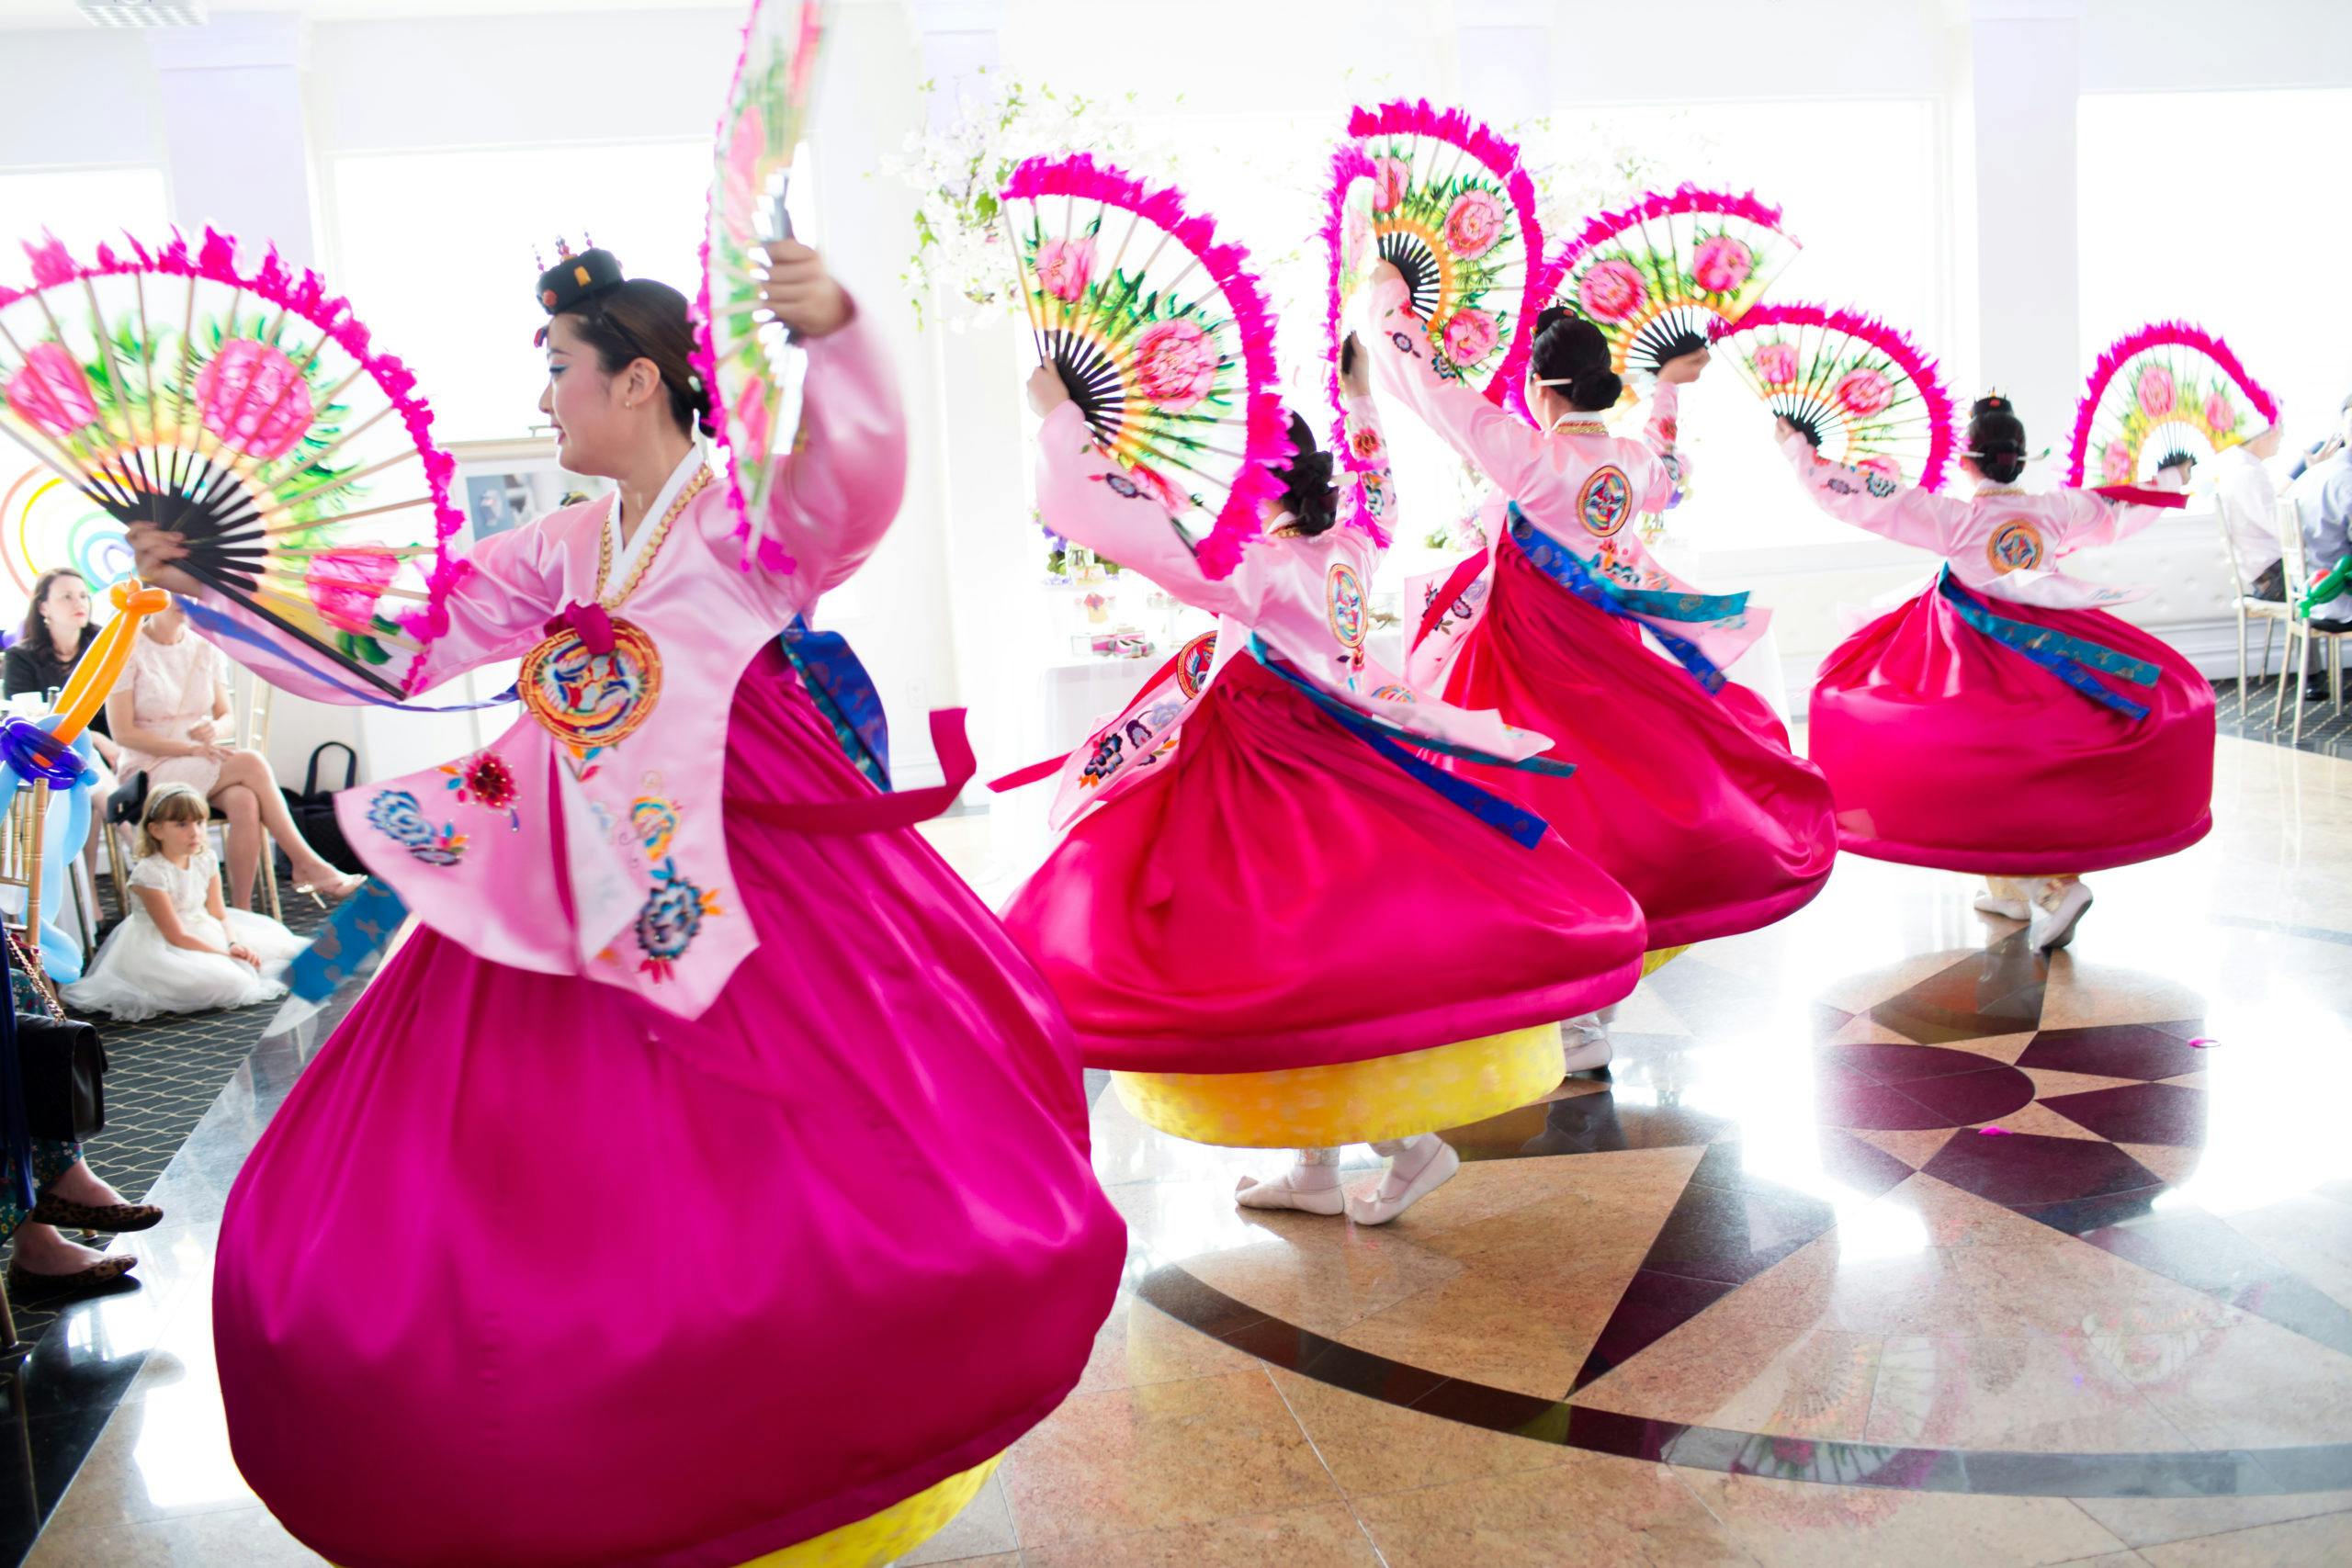 Delightful Pink and Green Kids First Birthday Party with Traditional Korean Performers Dancing | PartySlate